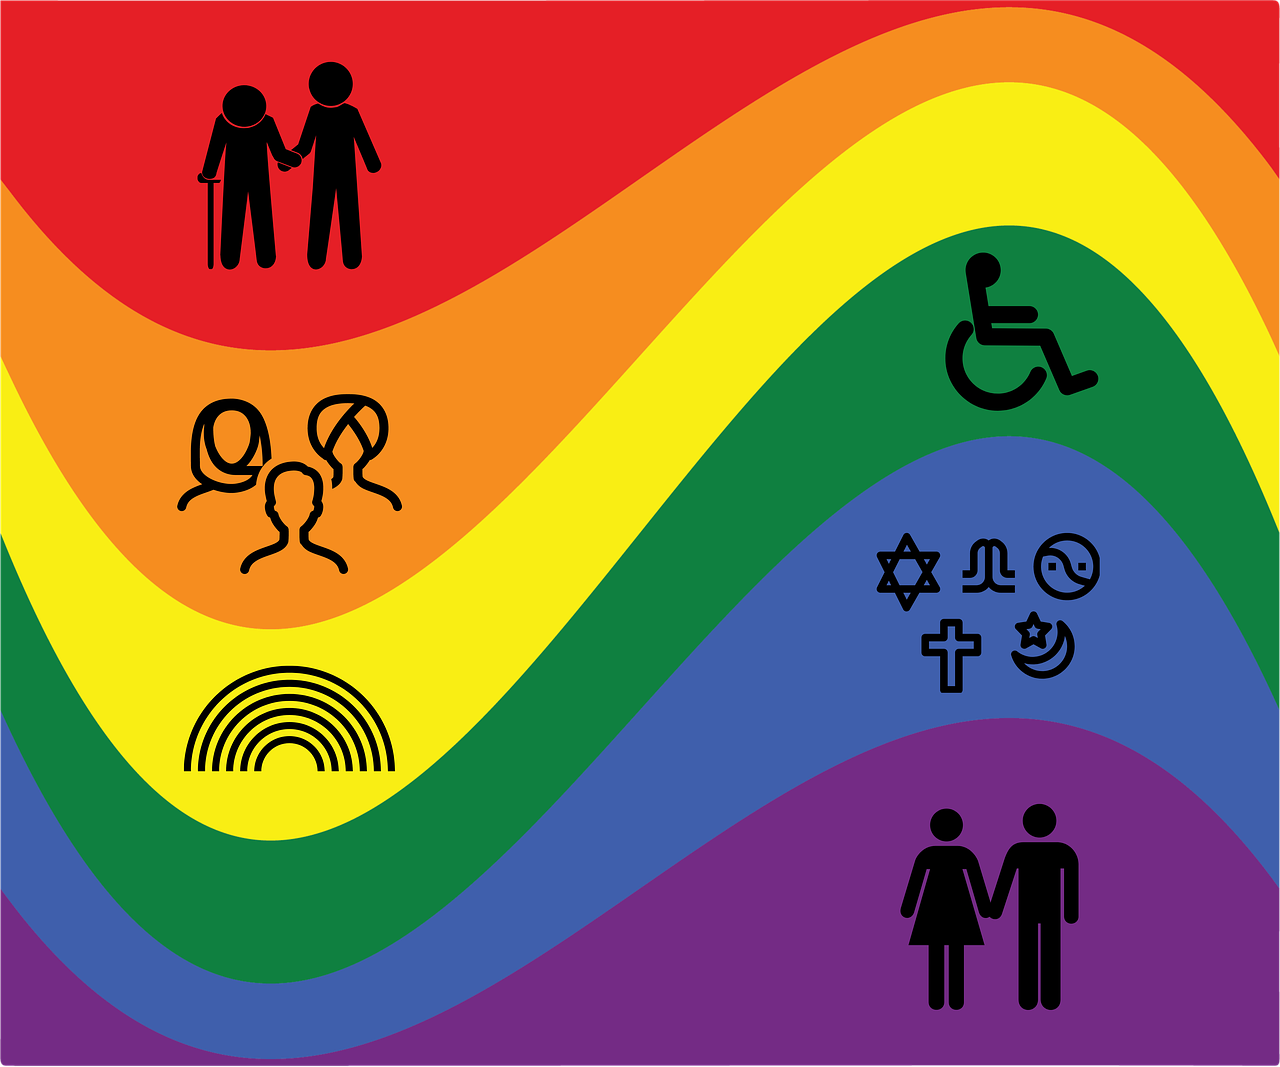 Inclusivity - Image by Rosy from Pixabay